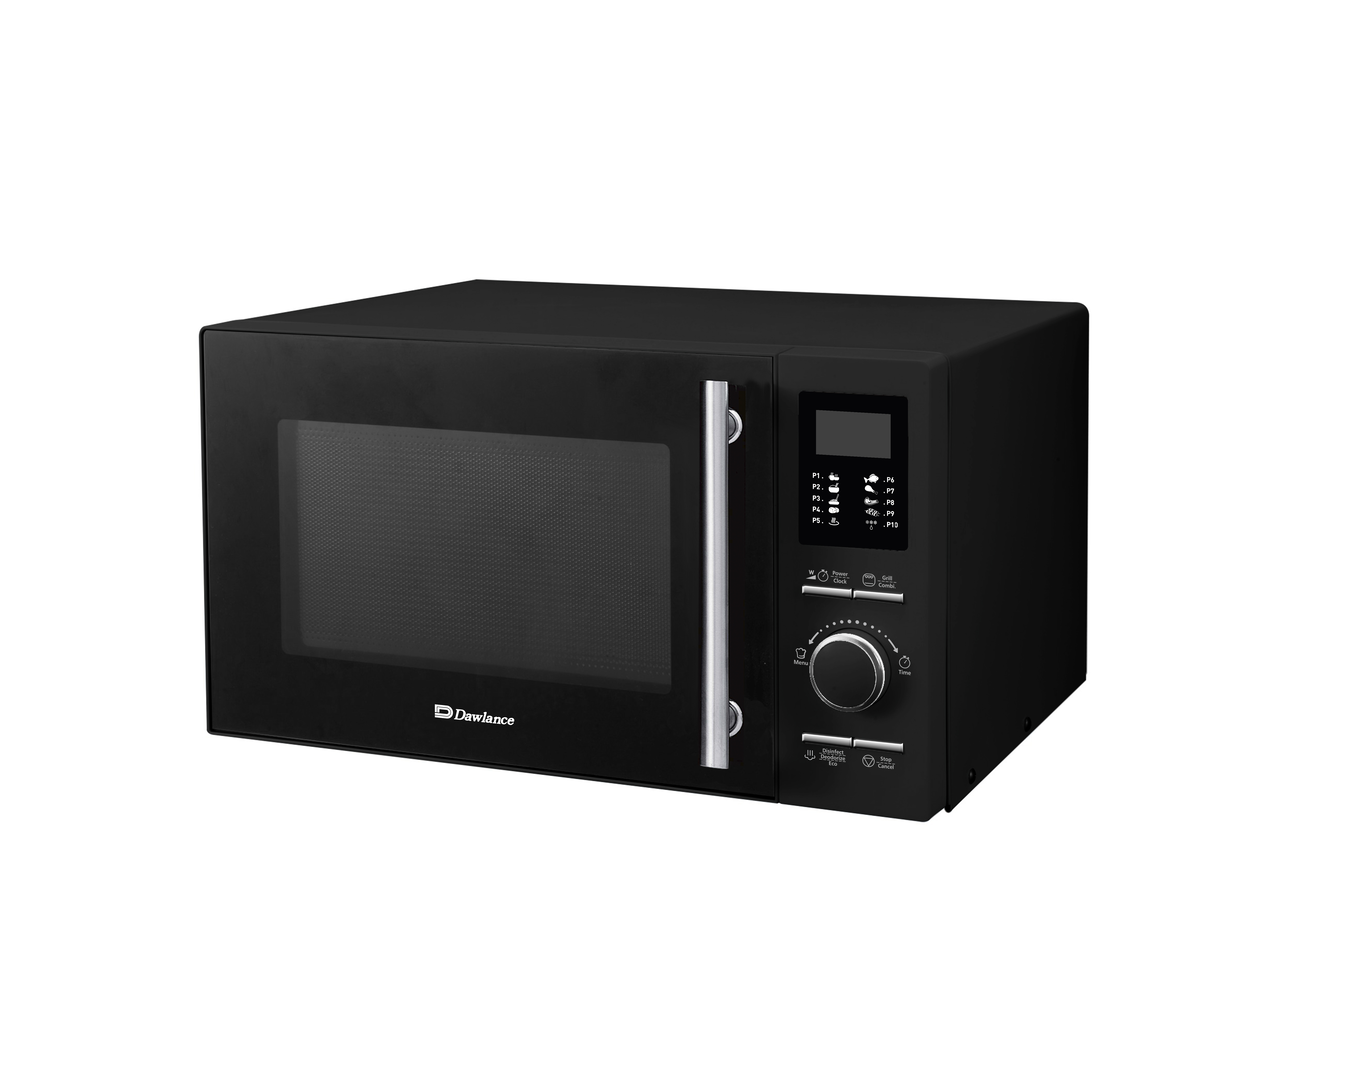 Dawlance DW395HCG Microwave Oven With Grill